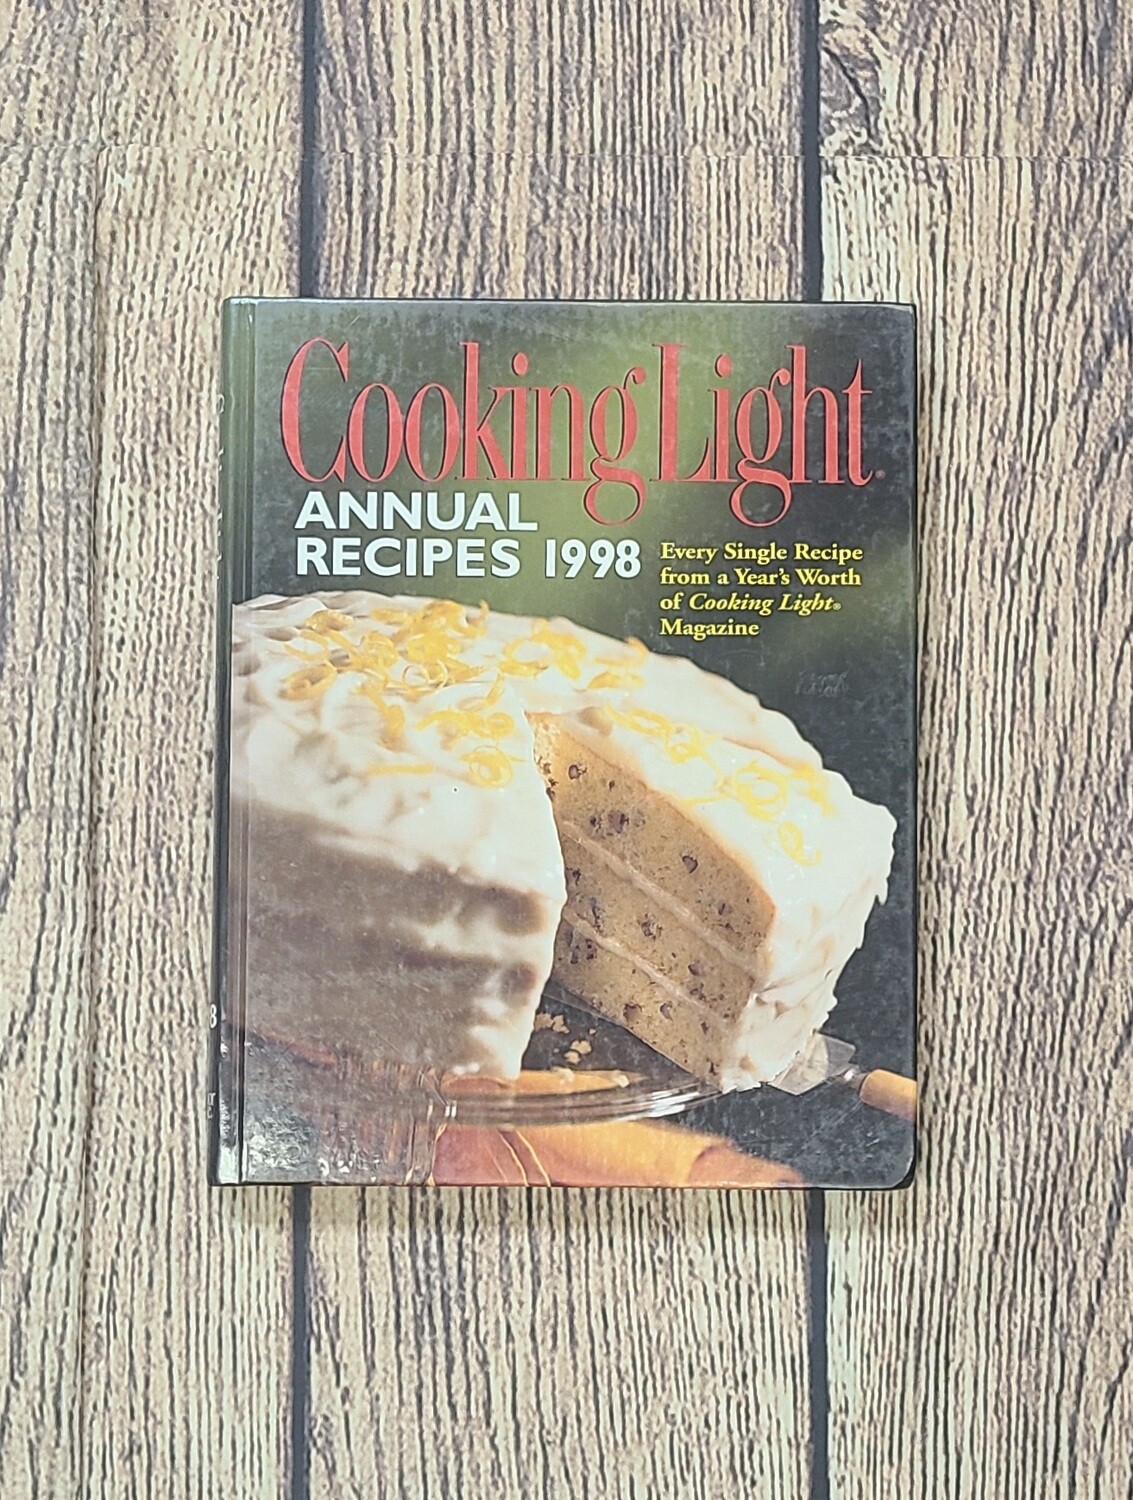 Cooking Light: Annual Recipes 1998 by Oxmoor House